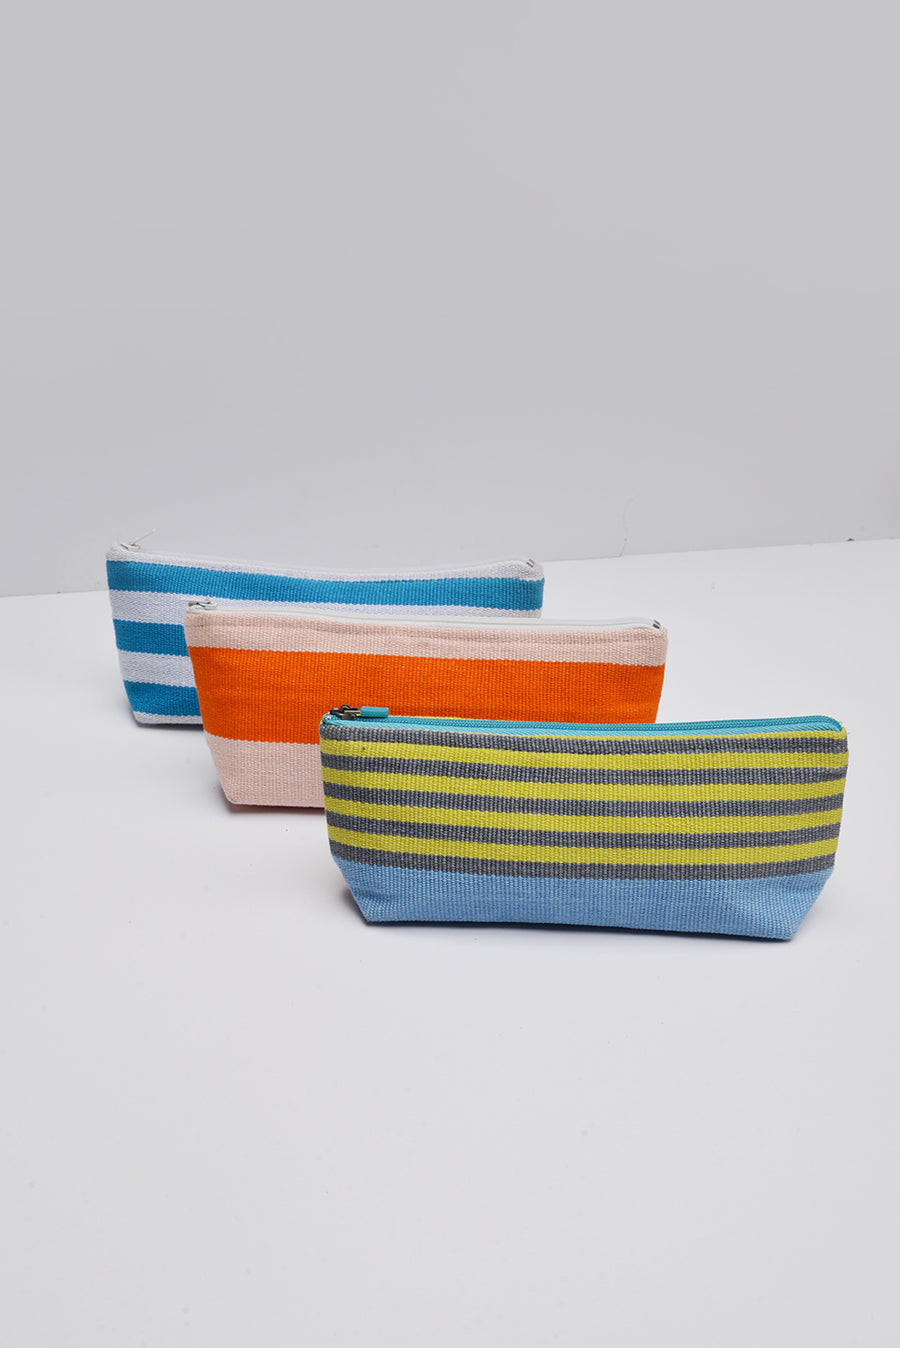 Striped Pencil Cases (Set of 3)